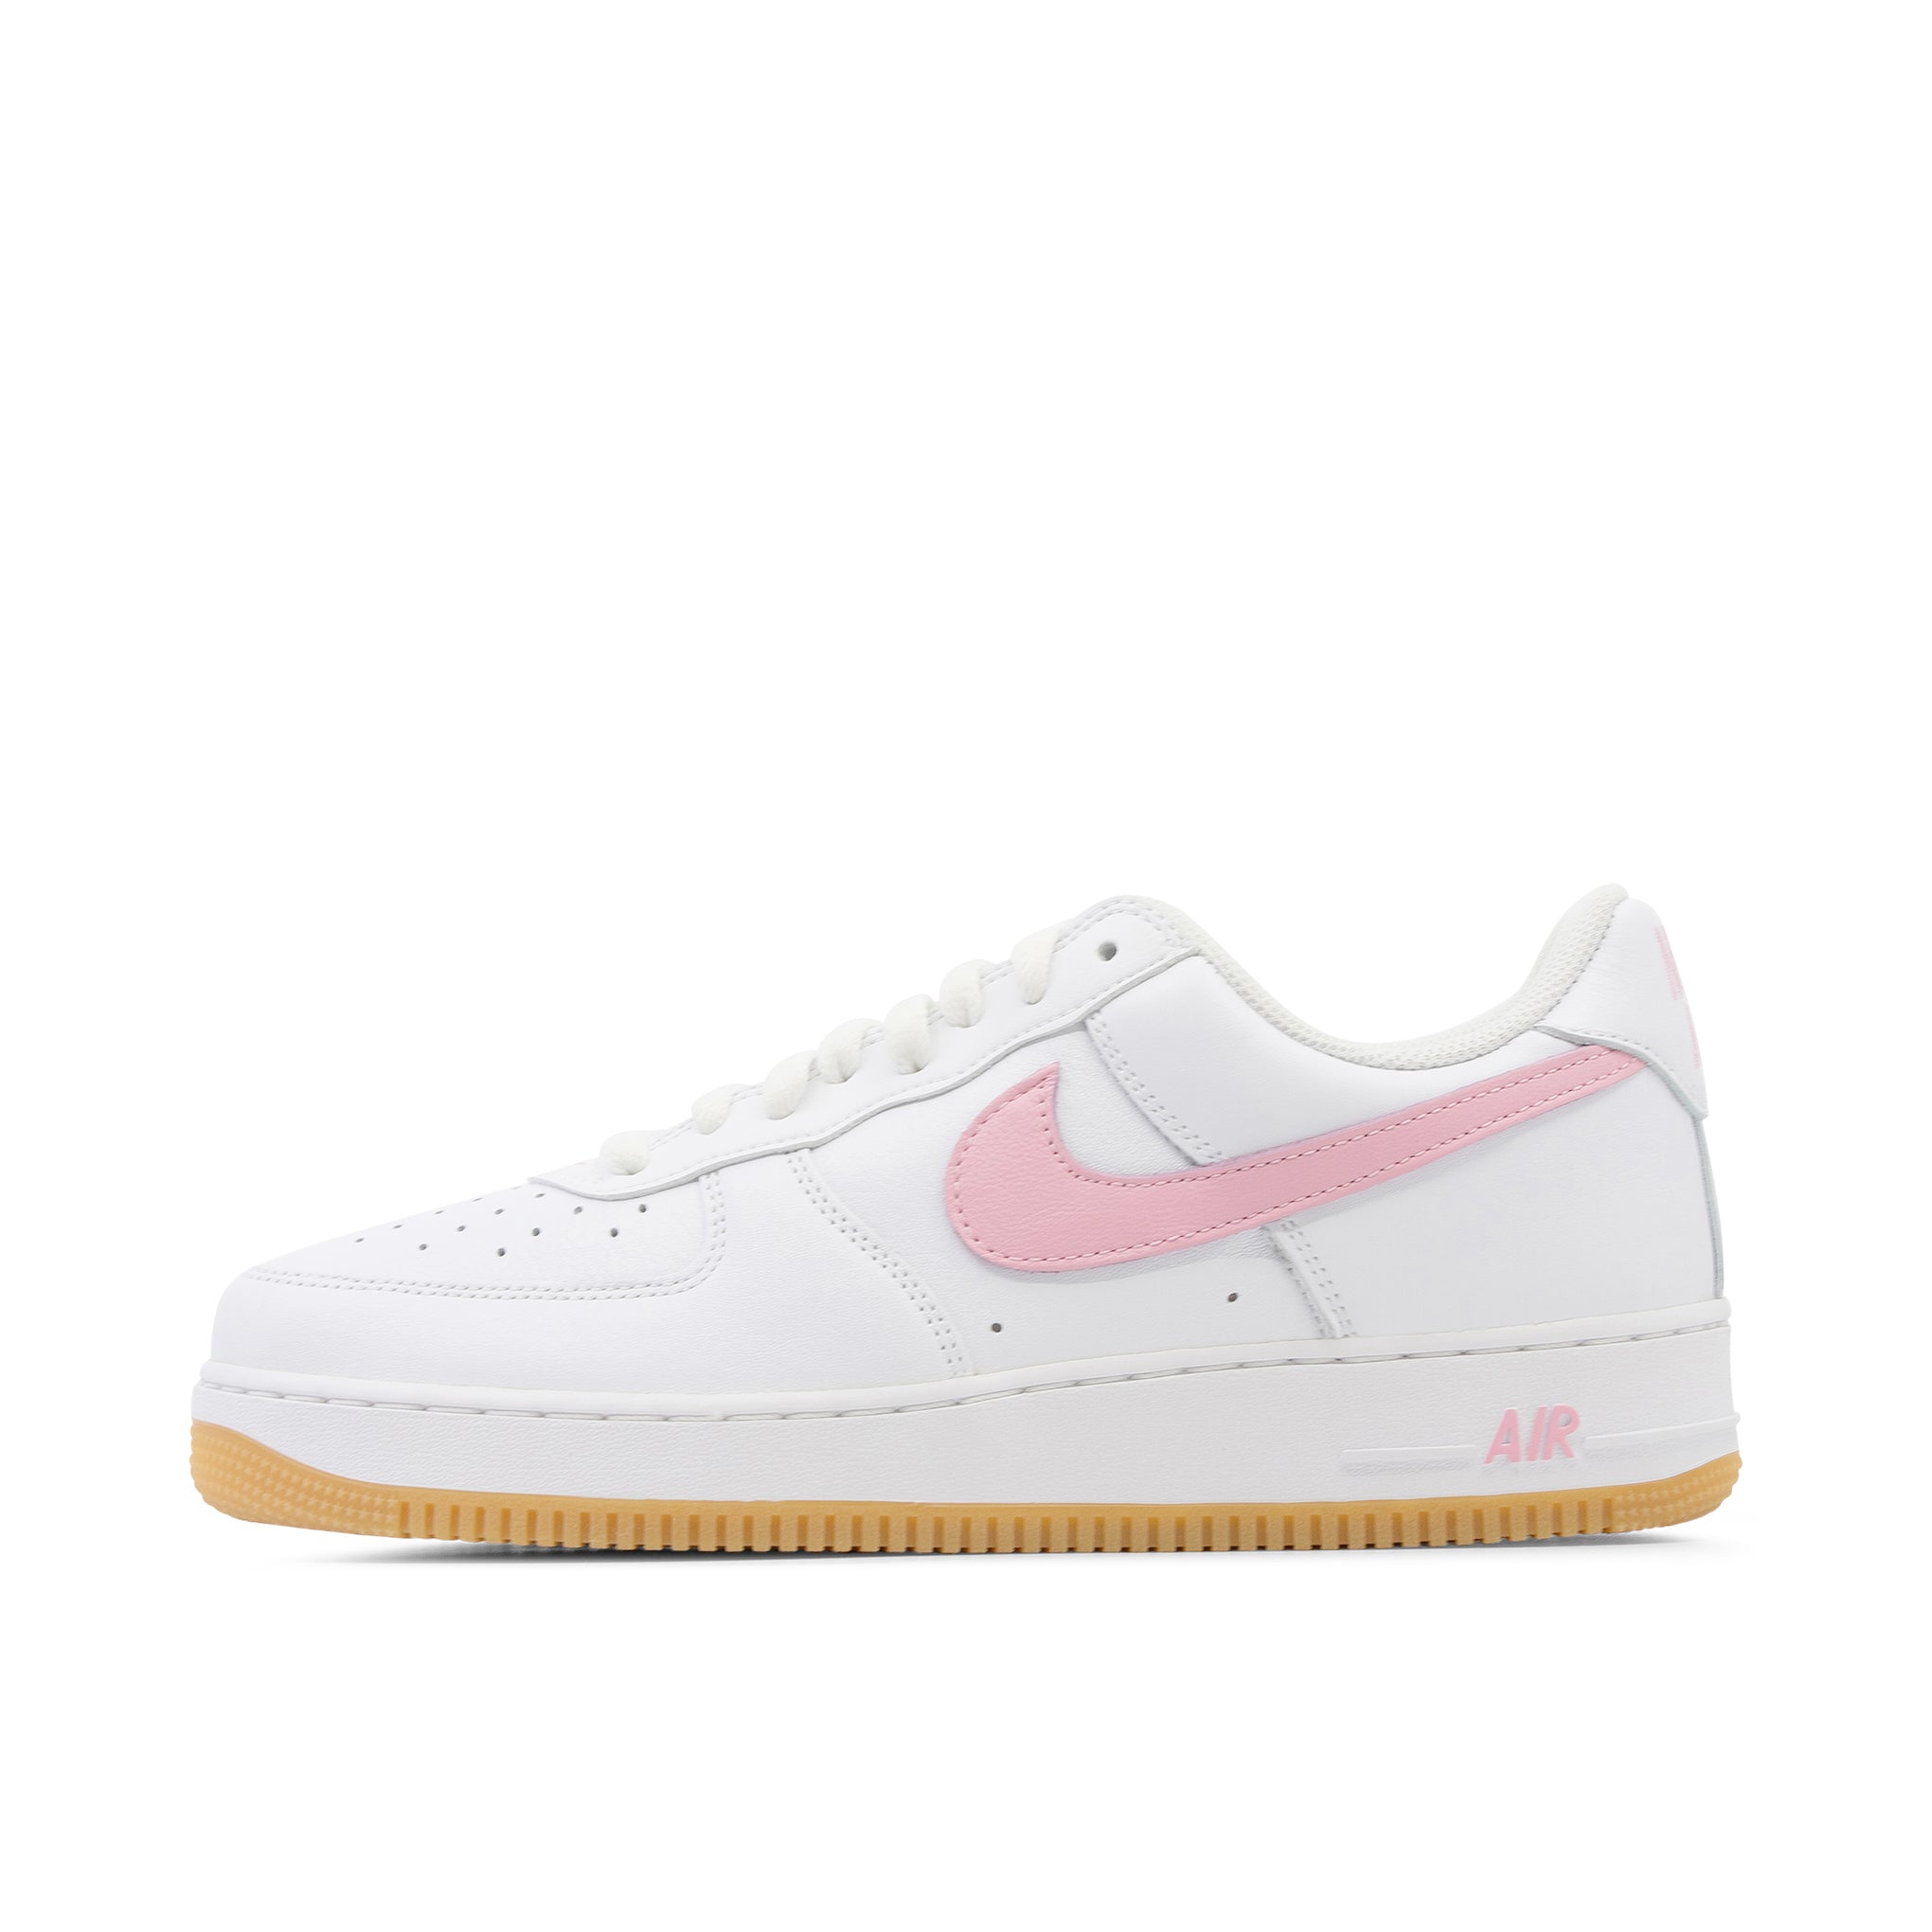 NIKE AIR FORCE 1 LOW COLOR DEL MES ROSA GOMA 